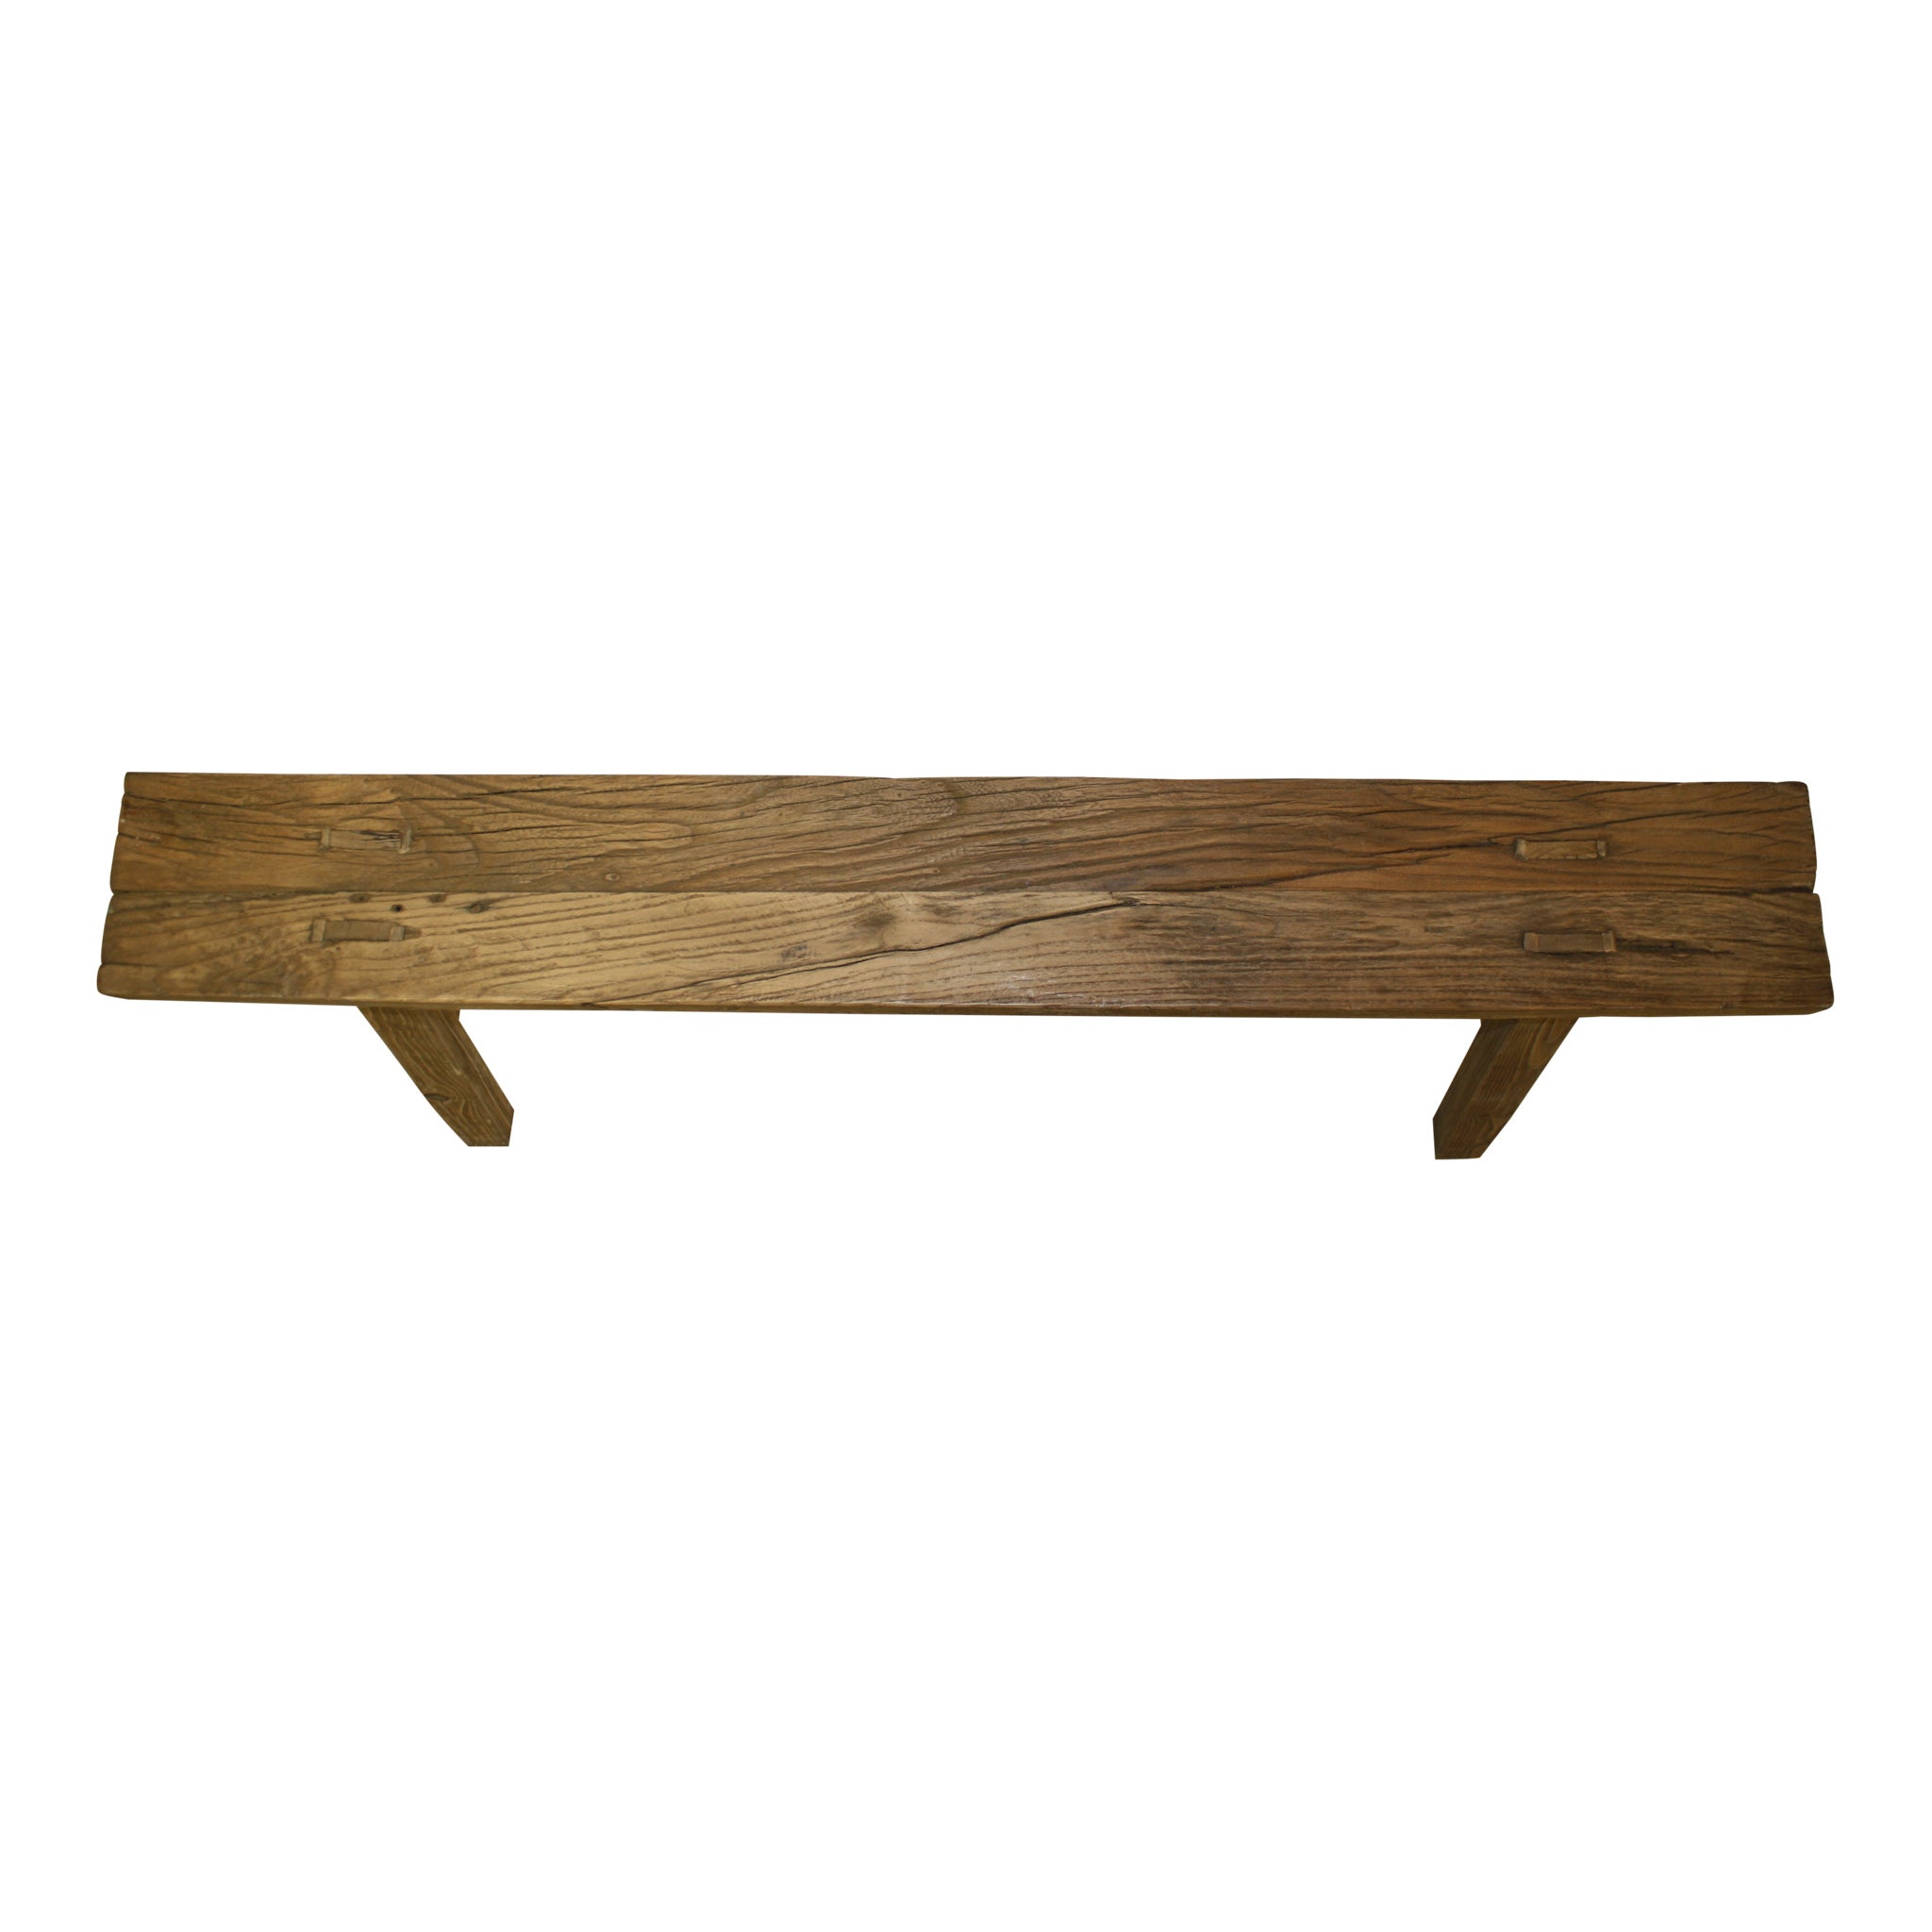 Small Mortise and Tenon Joint Oak Farm Bench